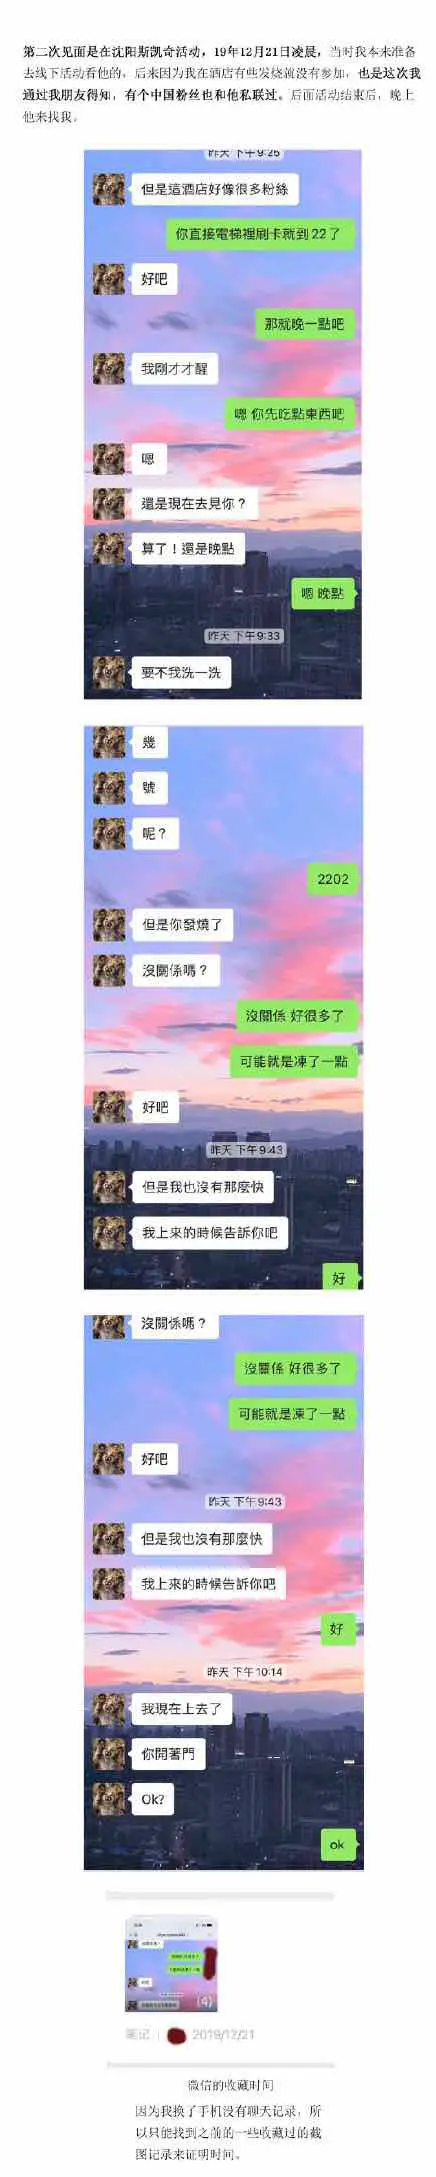 38jiejie 三八姐姐｜Chinese Fan Accuses WayVs Lucas of Allegedly Cheating, Treating Fans as Part of His Harem, and Having Unprotected pic